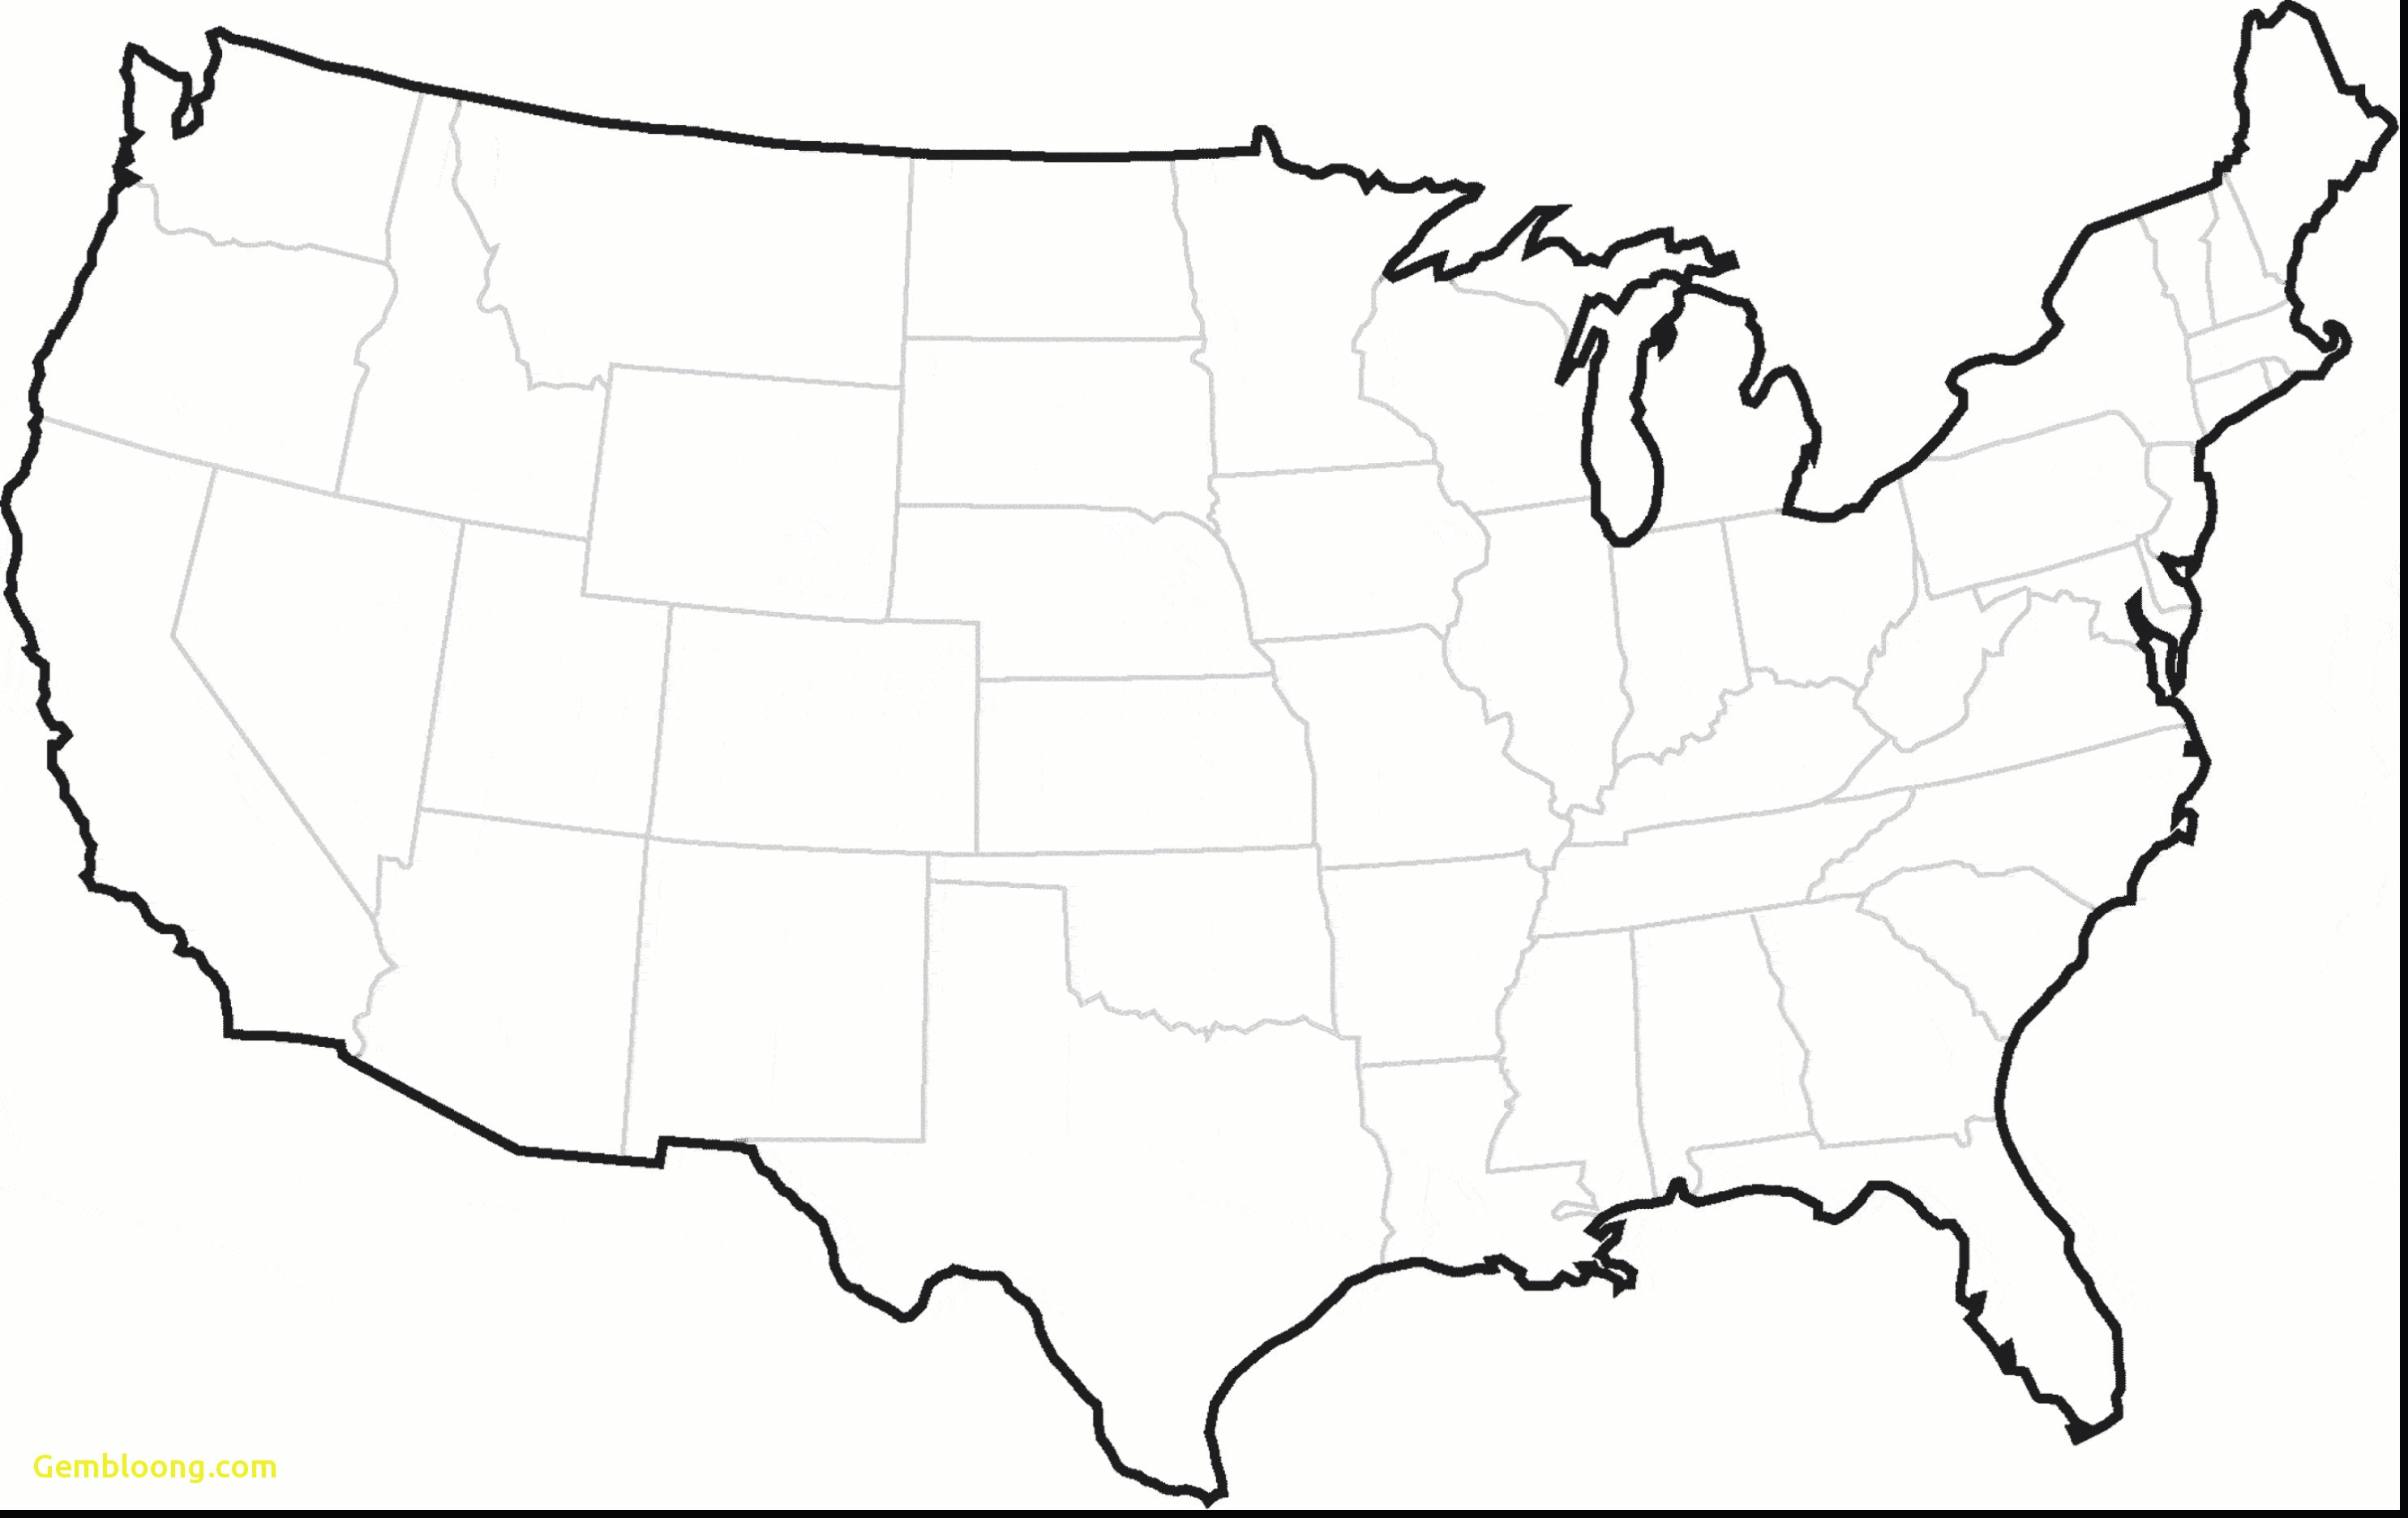 northeast usa outline map valid free printable us map with cities and states outline names blank